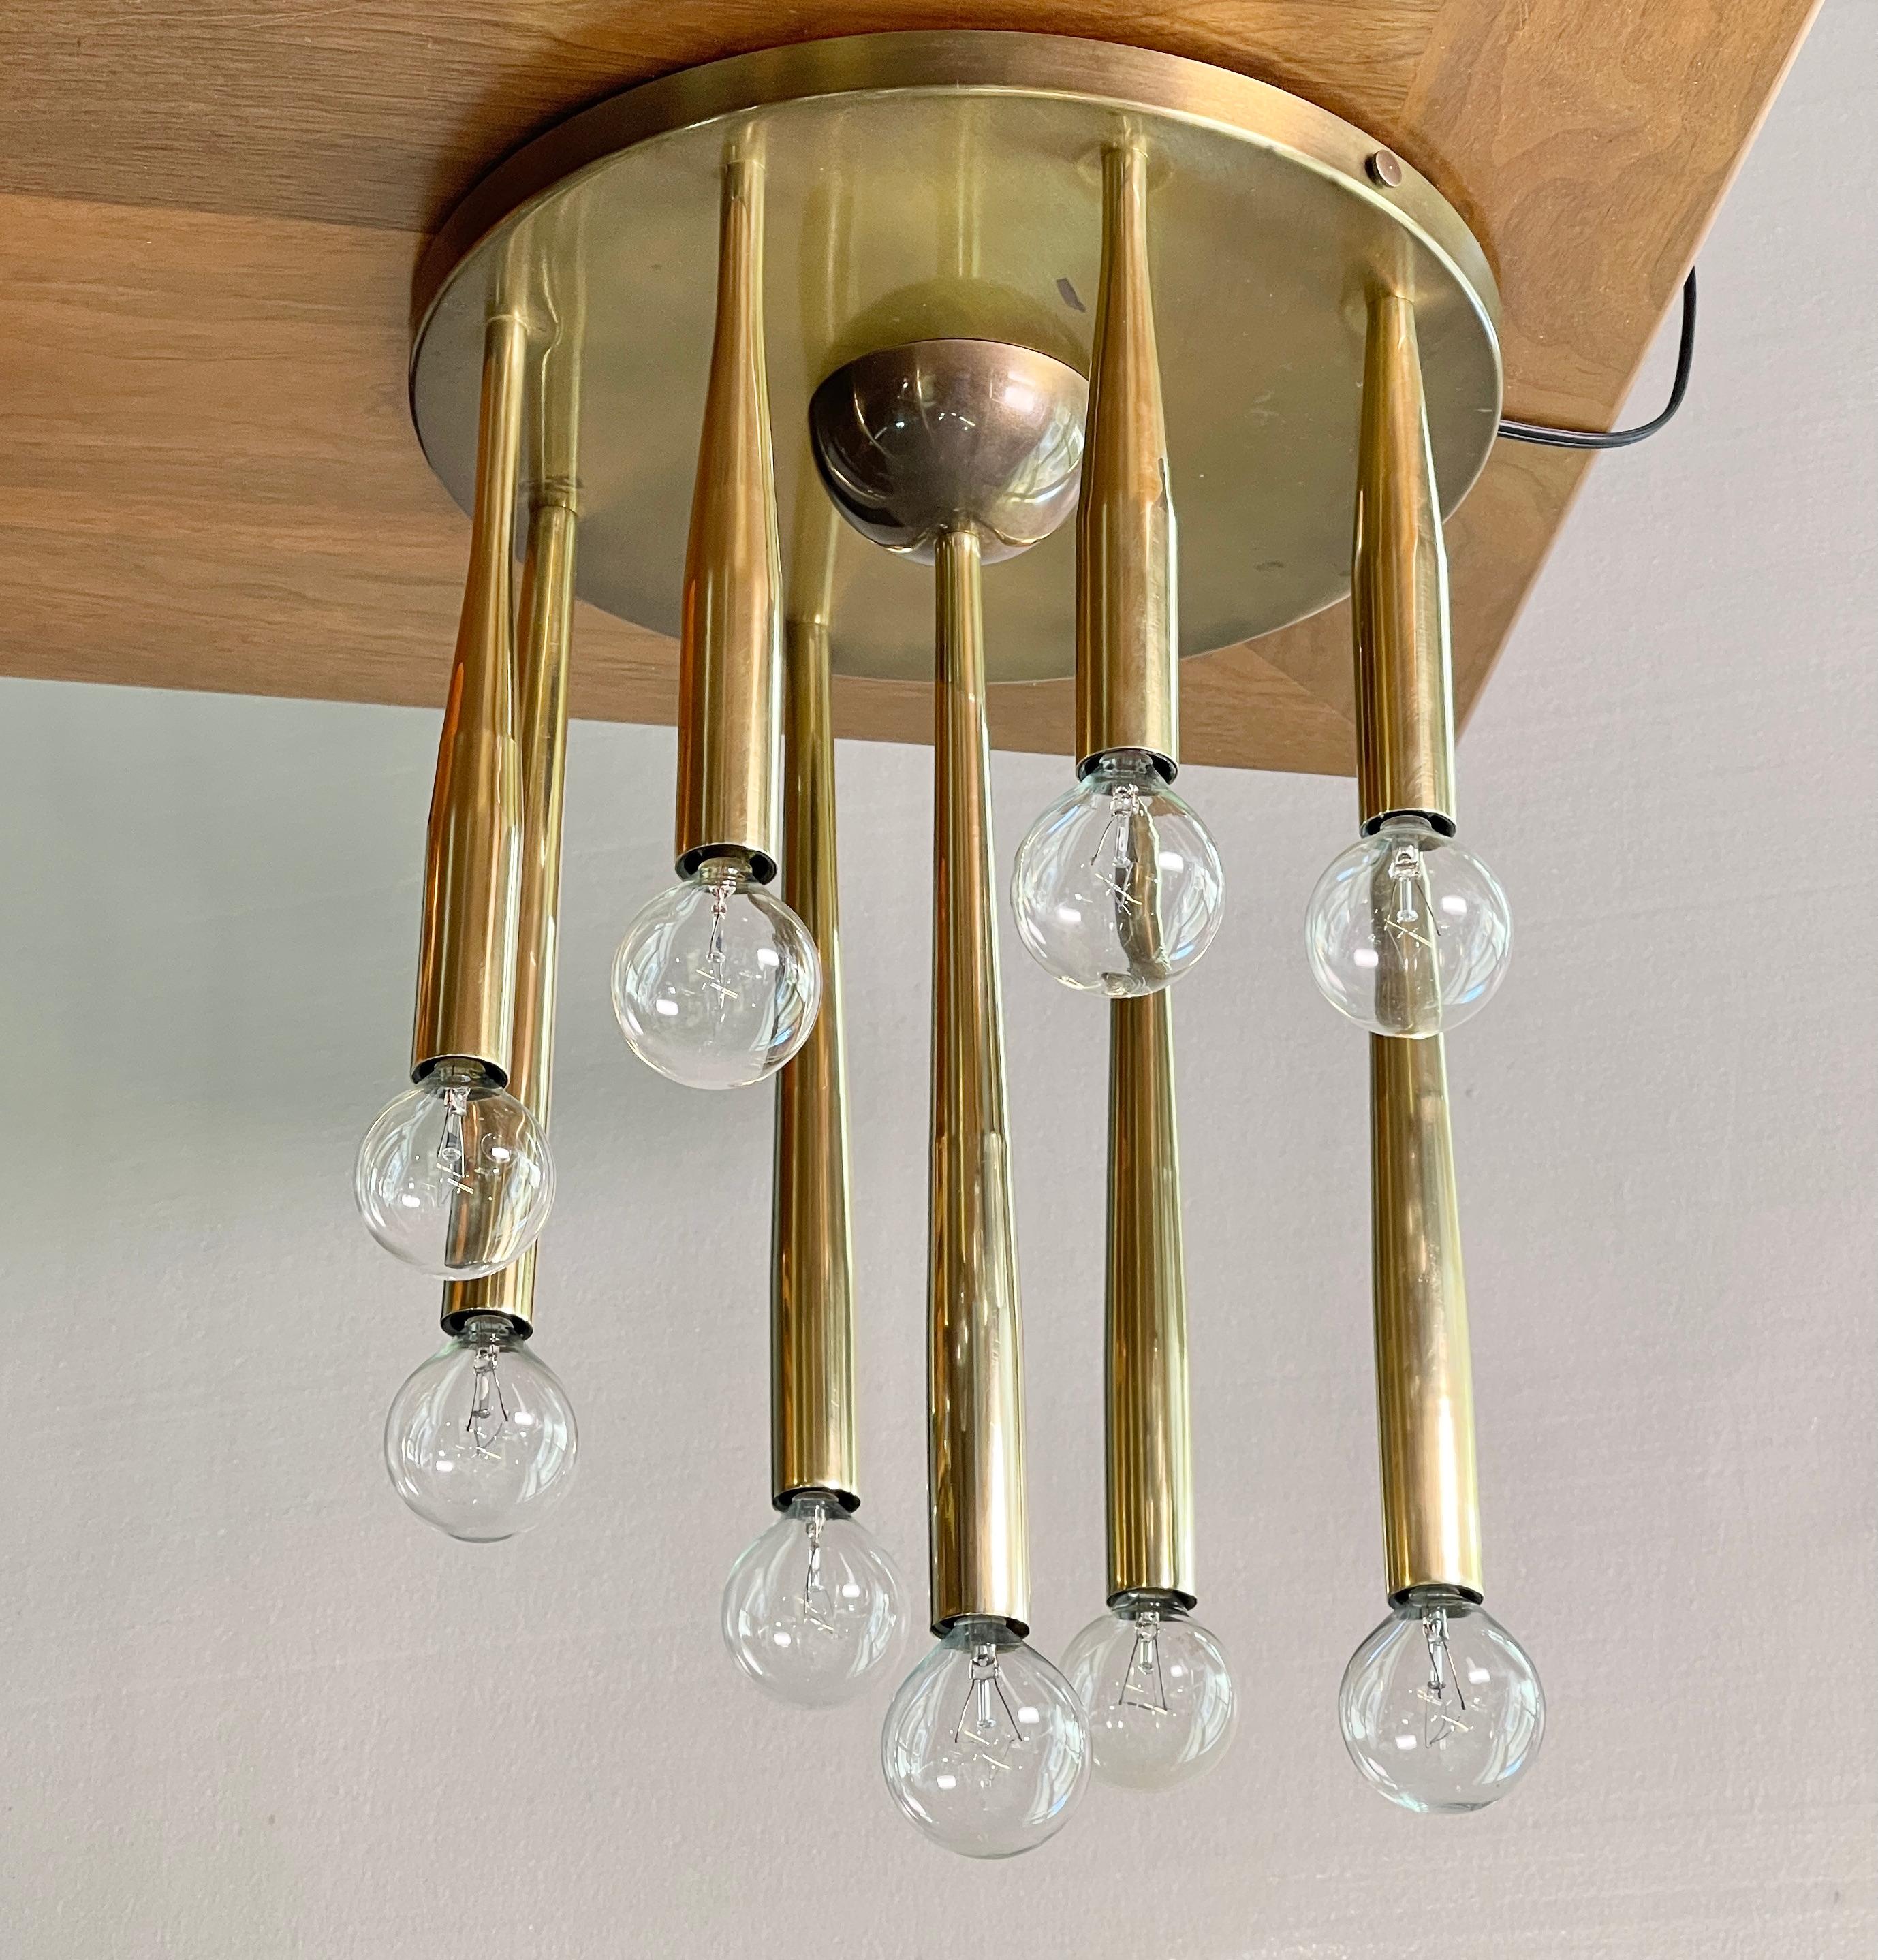 Very rare 1950's Italian ceiling flush mount light fixture attributed to Gio Ponti. 
The fixture consists of a 12 inch diameter round brass ceiling plate mounted, like candles on a birthday cake, by nine individual swage tapered solid brass